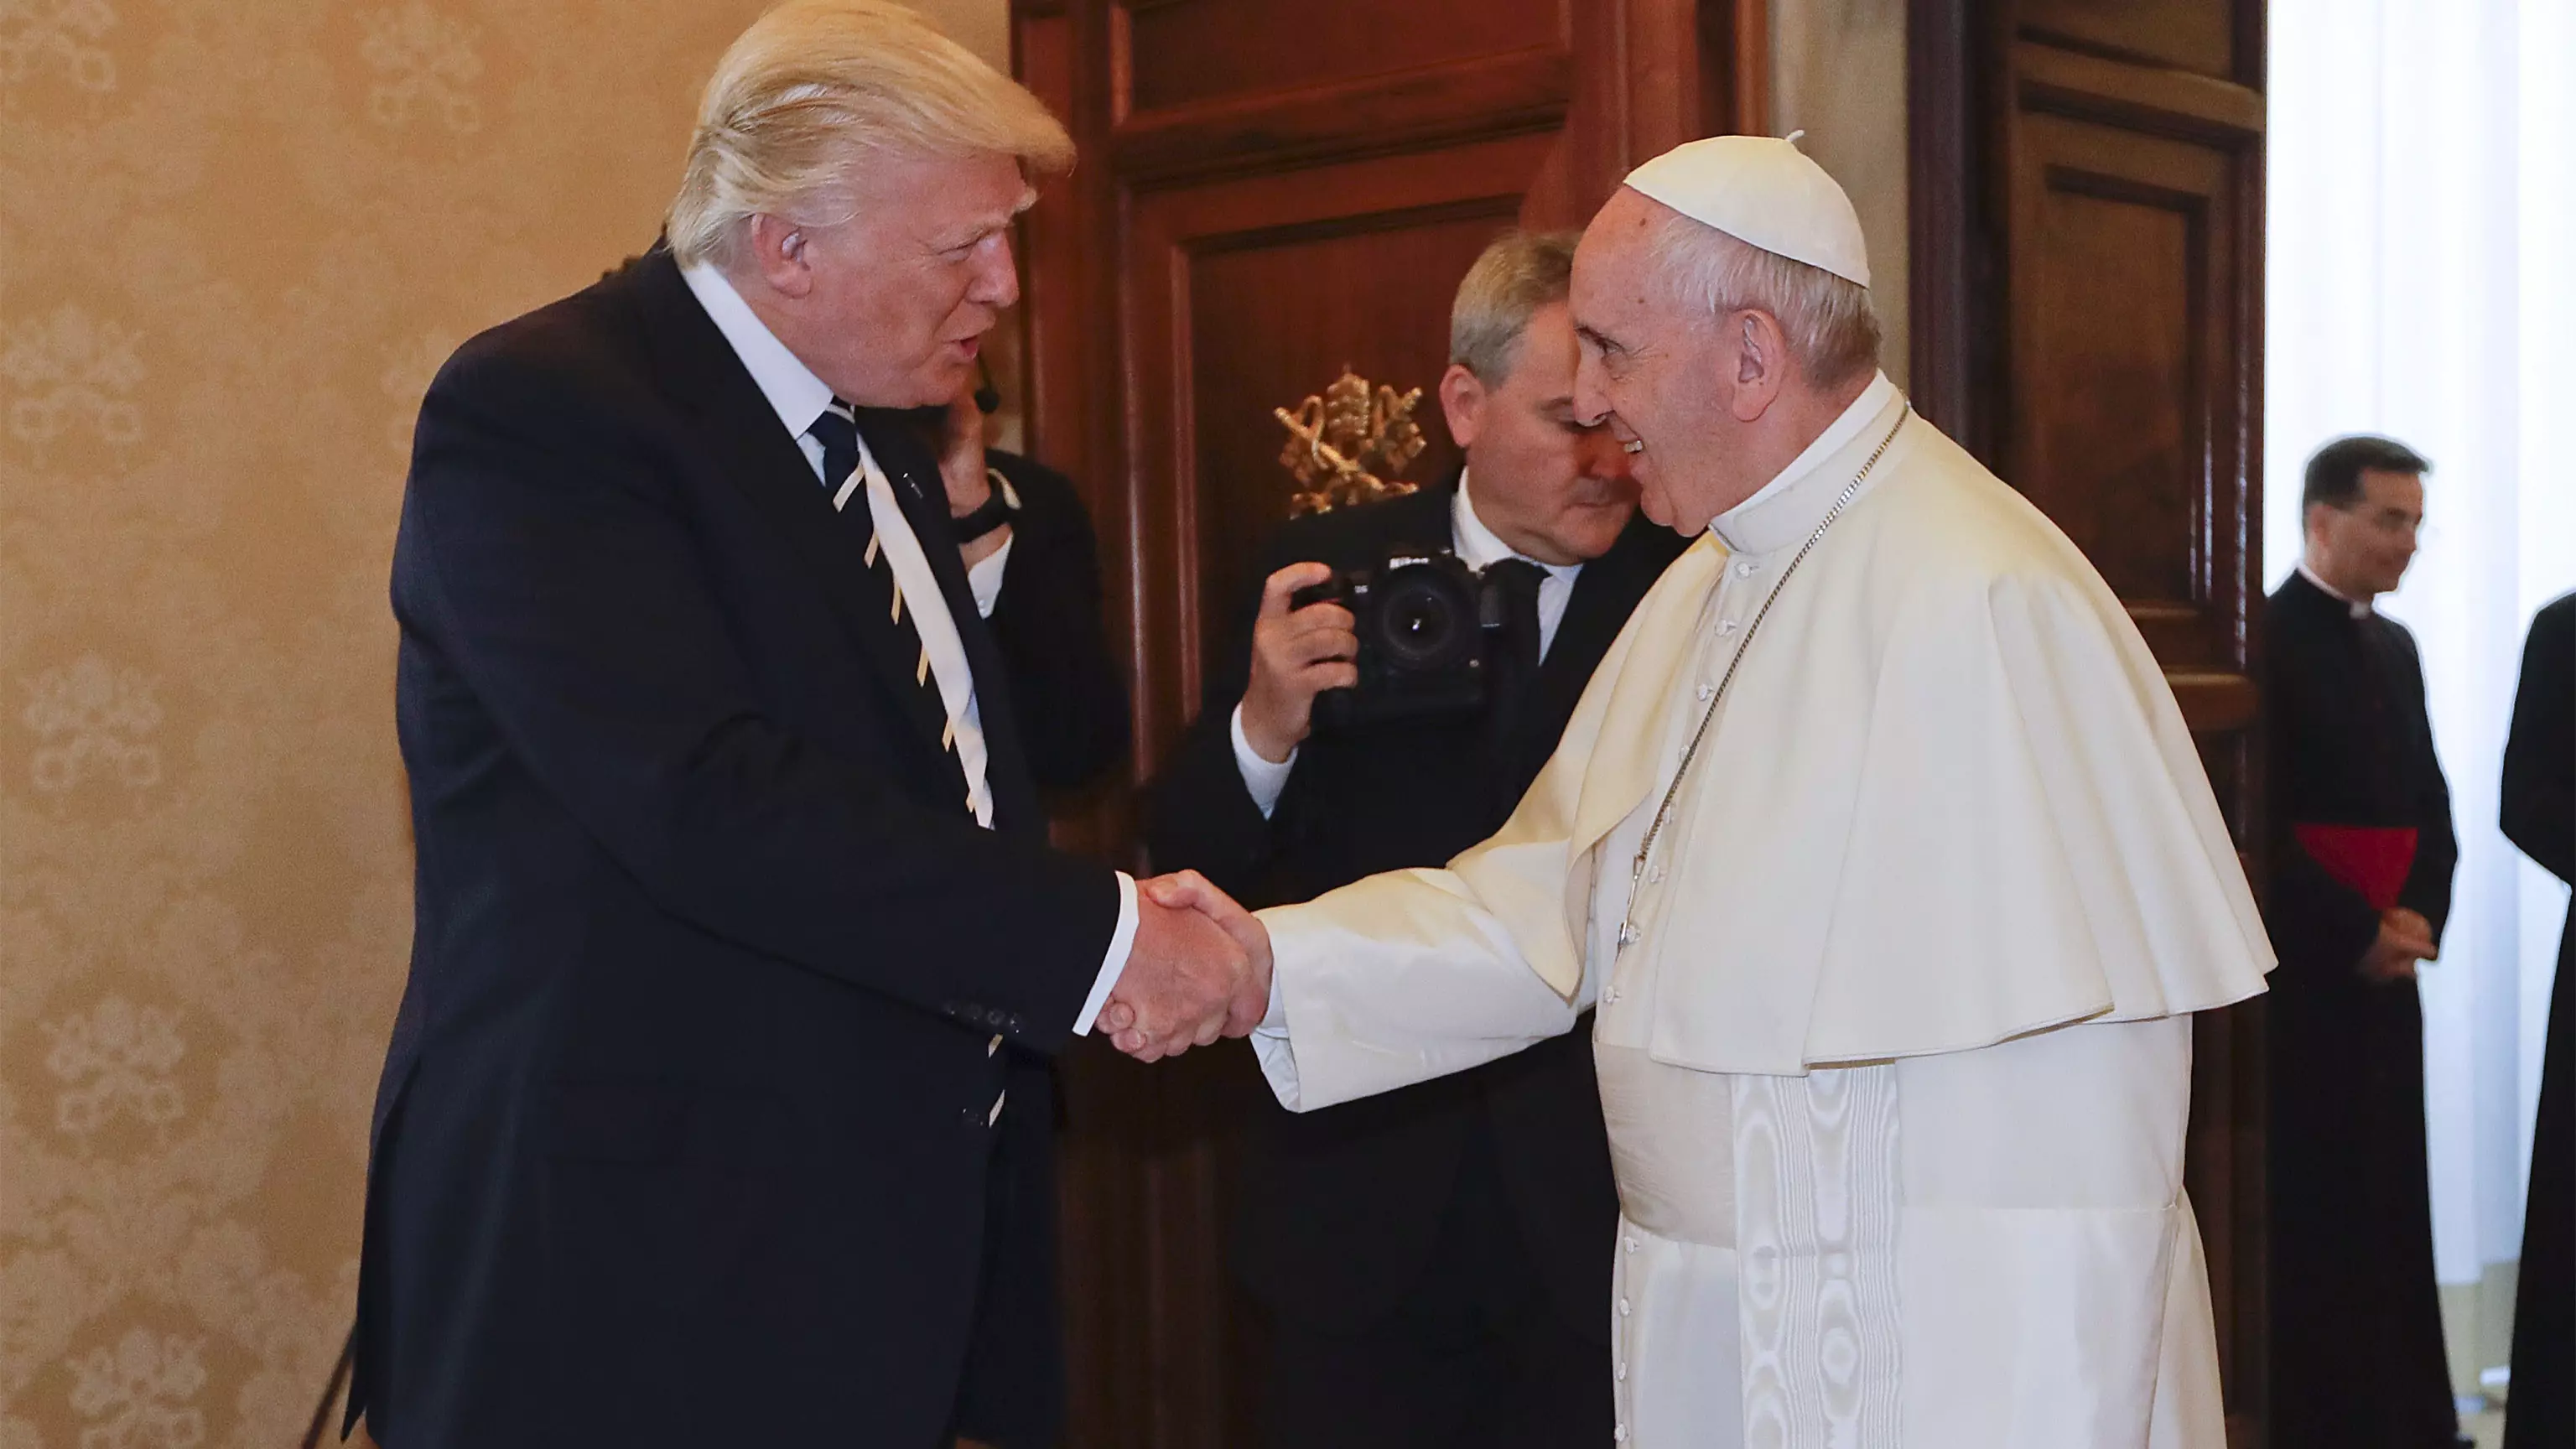 Pope Francis Presents Donald Trump With 192-Page Document On Climate Change